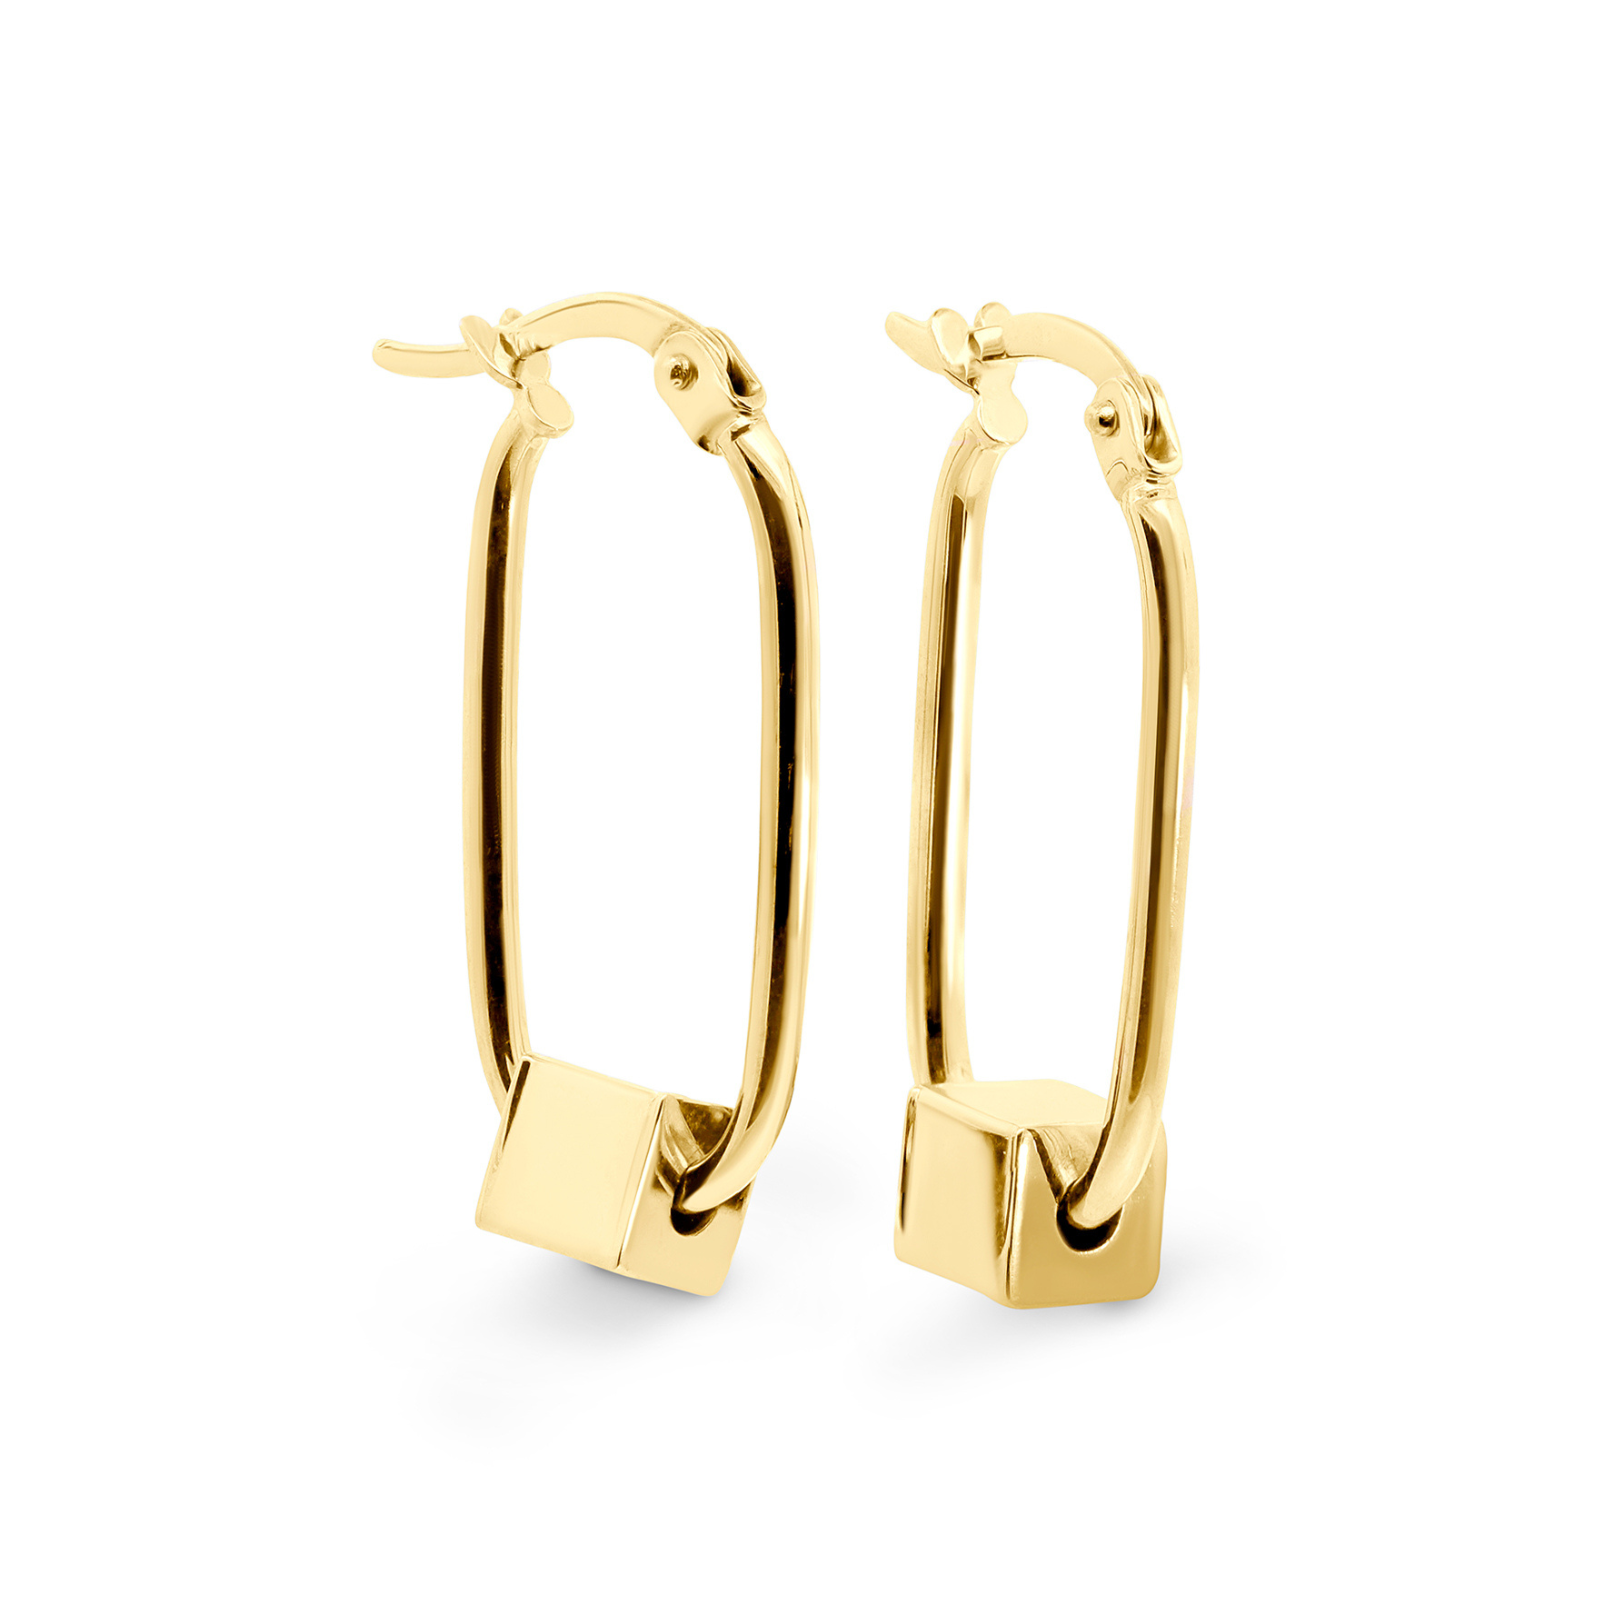 9ct Yellow Gold Oval Hoop Earrings With With Square Charm